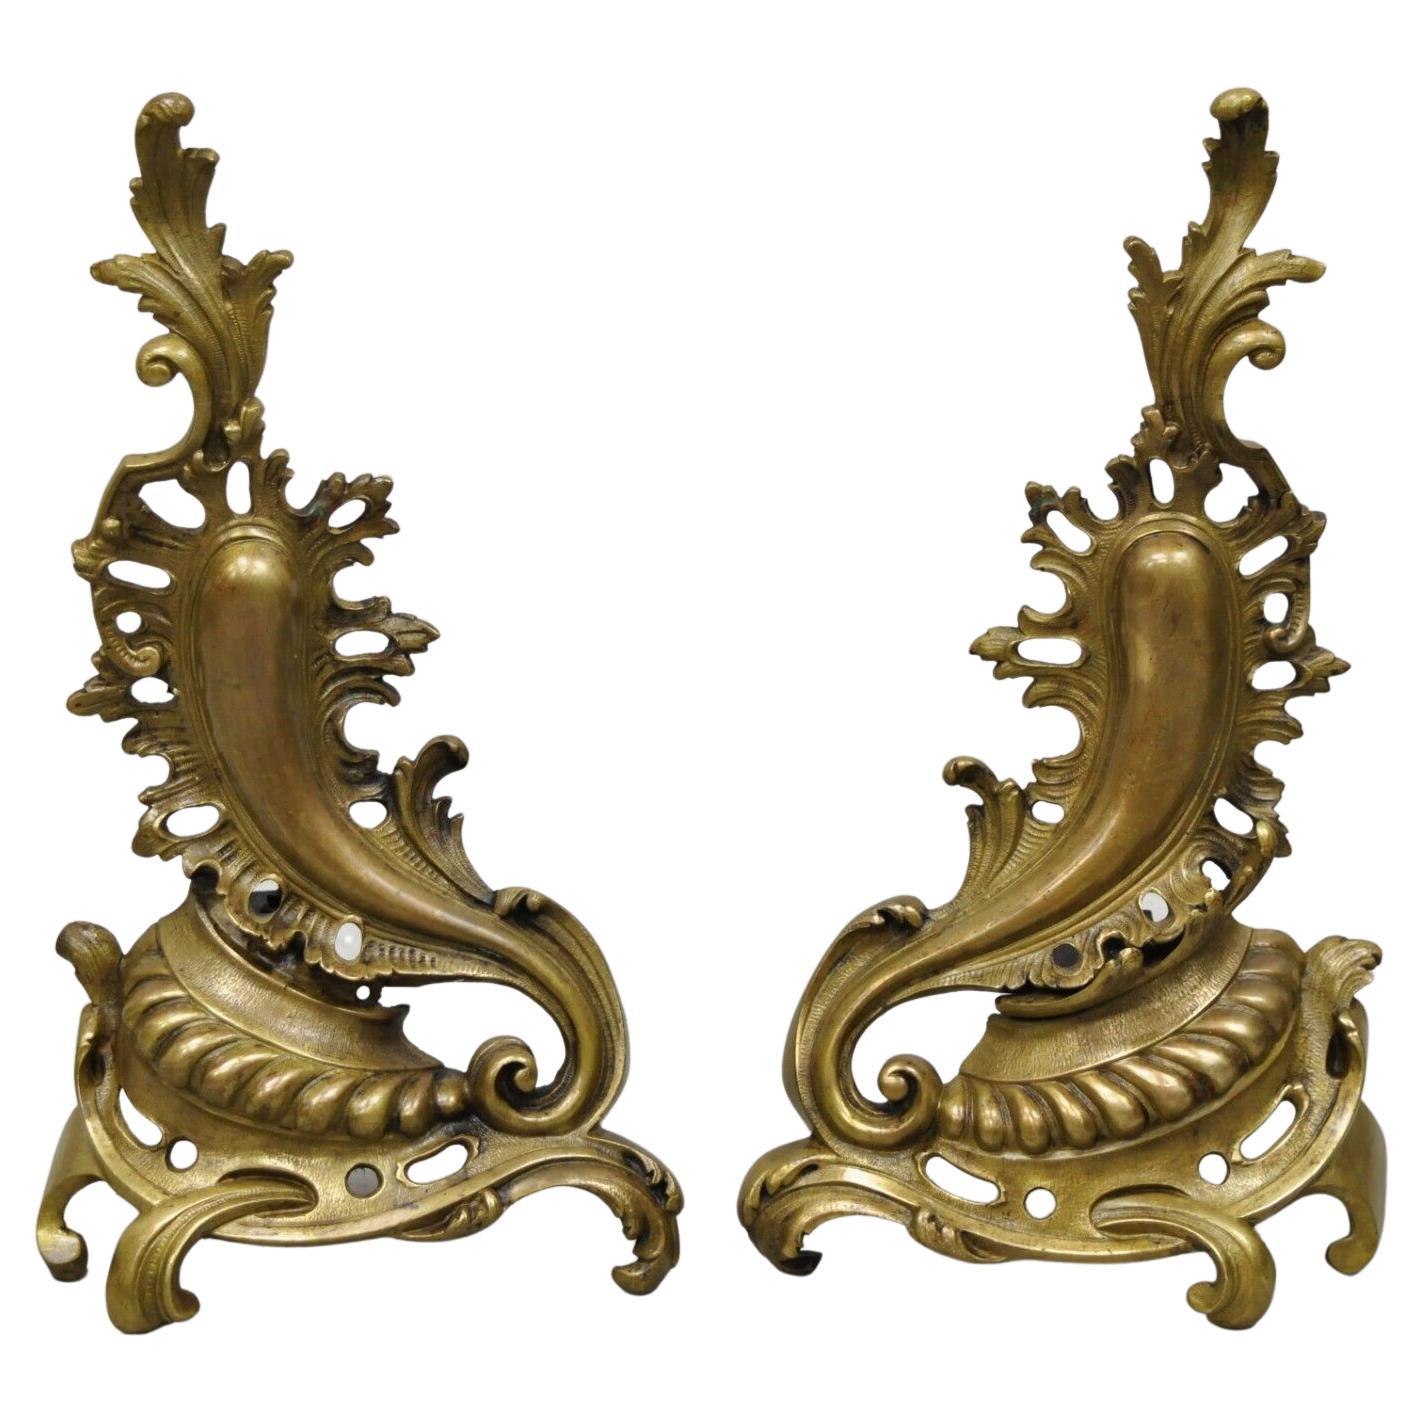 Vintage French Rococo Style Bronze Acanthus Leafy Scroll Andirons, Pair For Sale